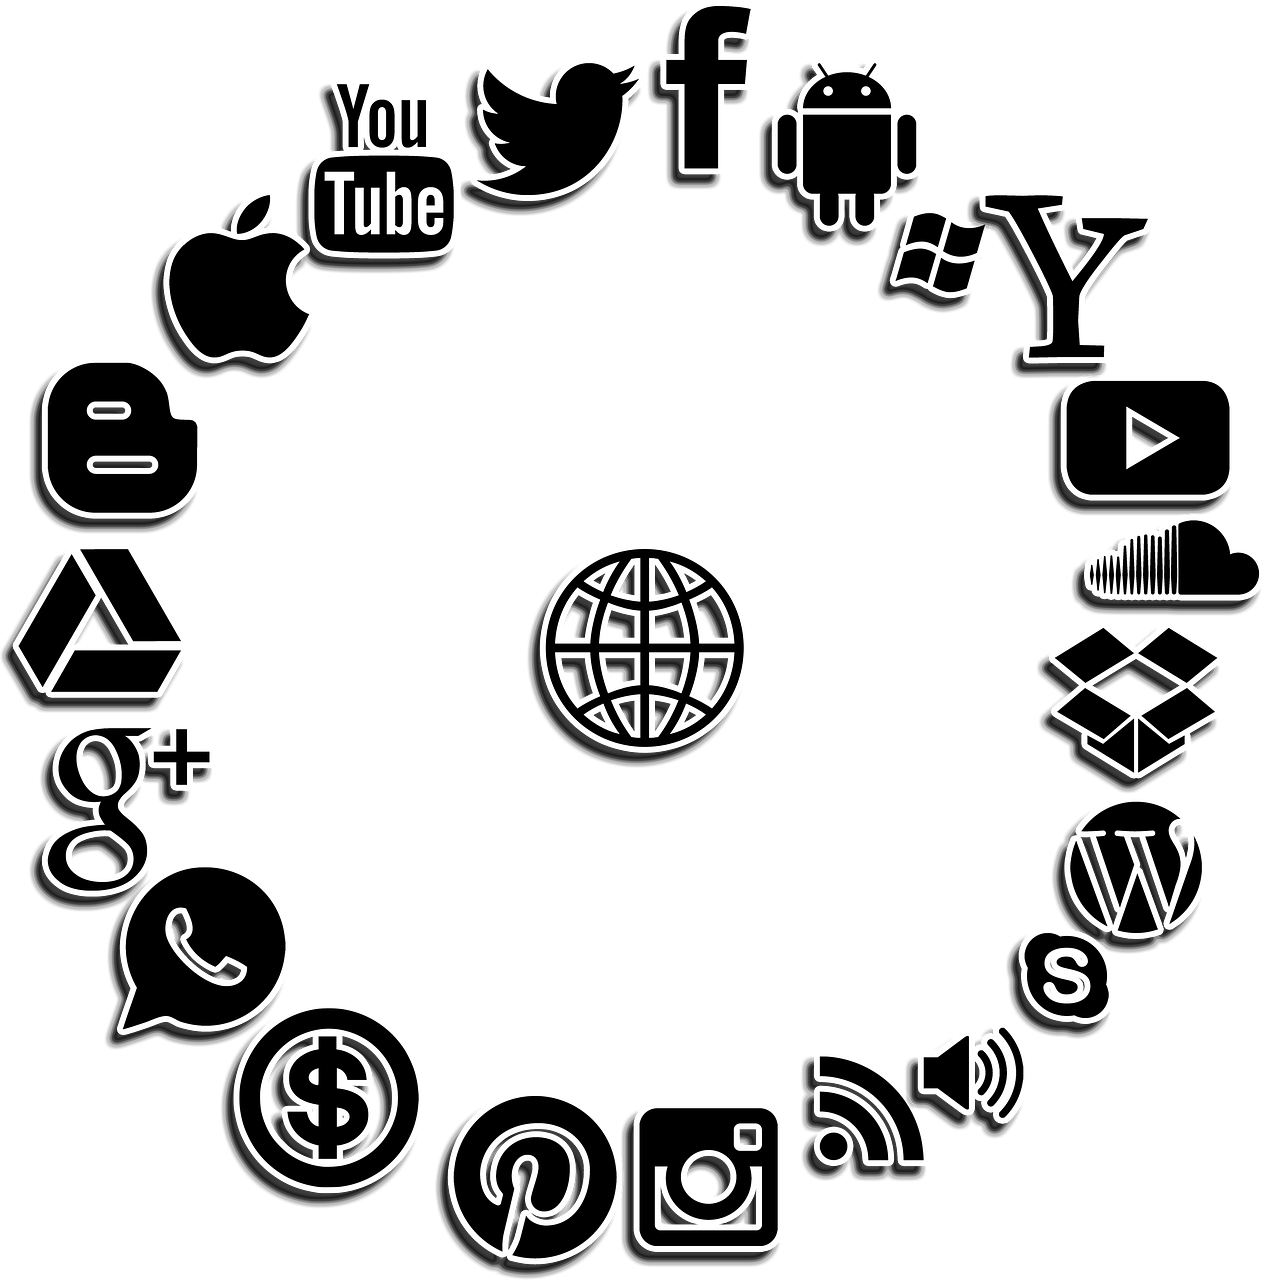 a circle of social icons on a black background, a diagram, by Andrei Kolkoutine, trending on pixabay, digital art, internet meme, black on white only, about to consume you, internet